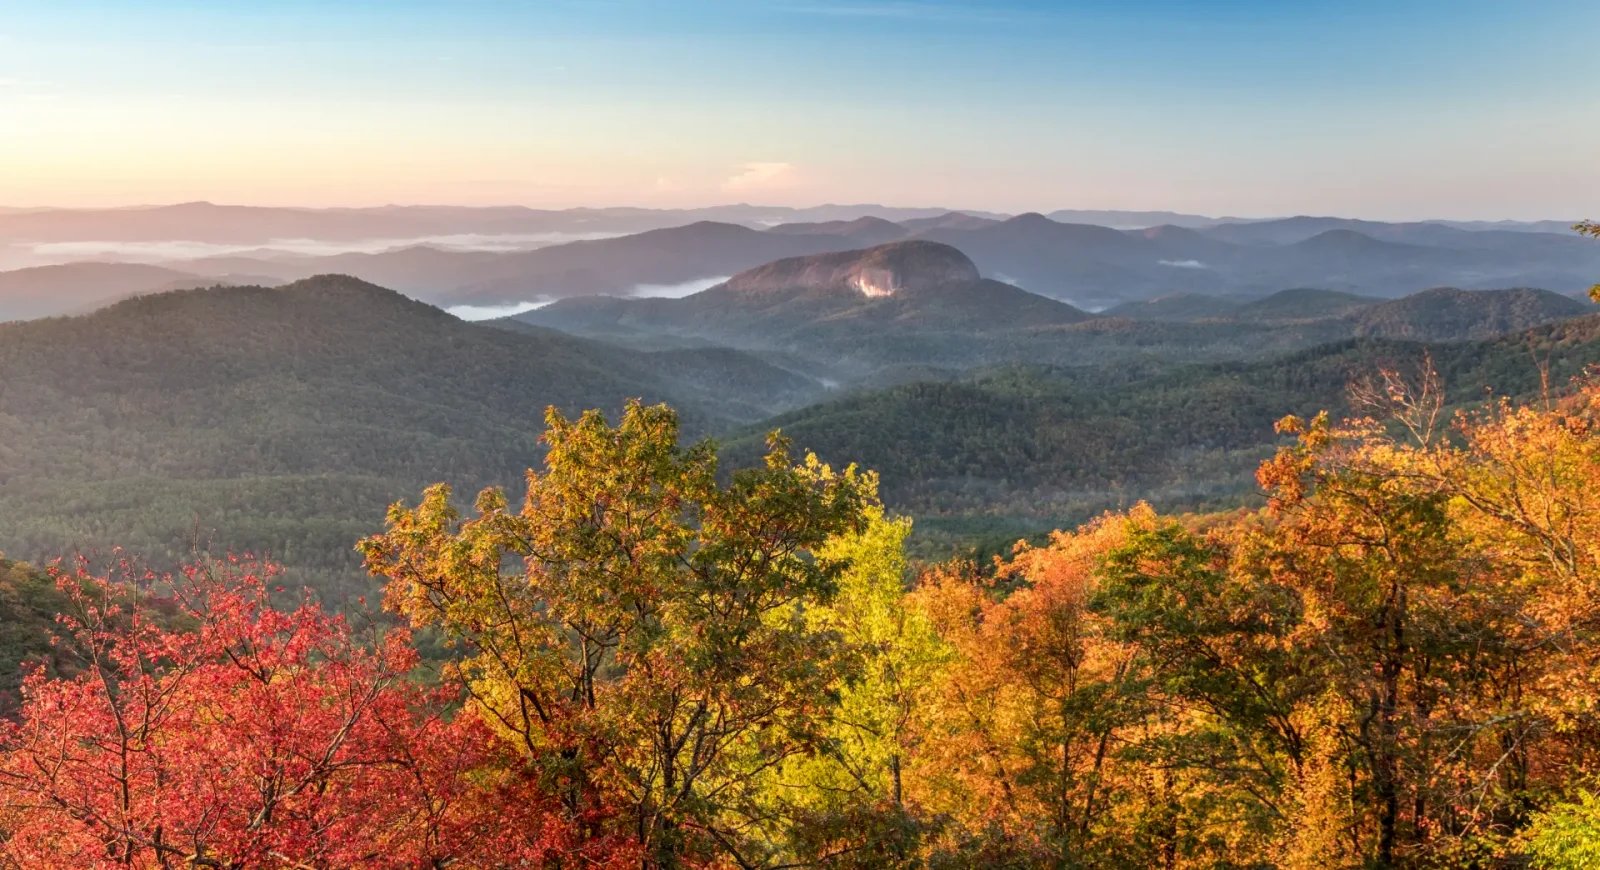 Fall colors in a beautifil mountain landscape at the Pounding Mill Overlook in Brevard, North Carolina